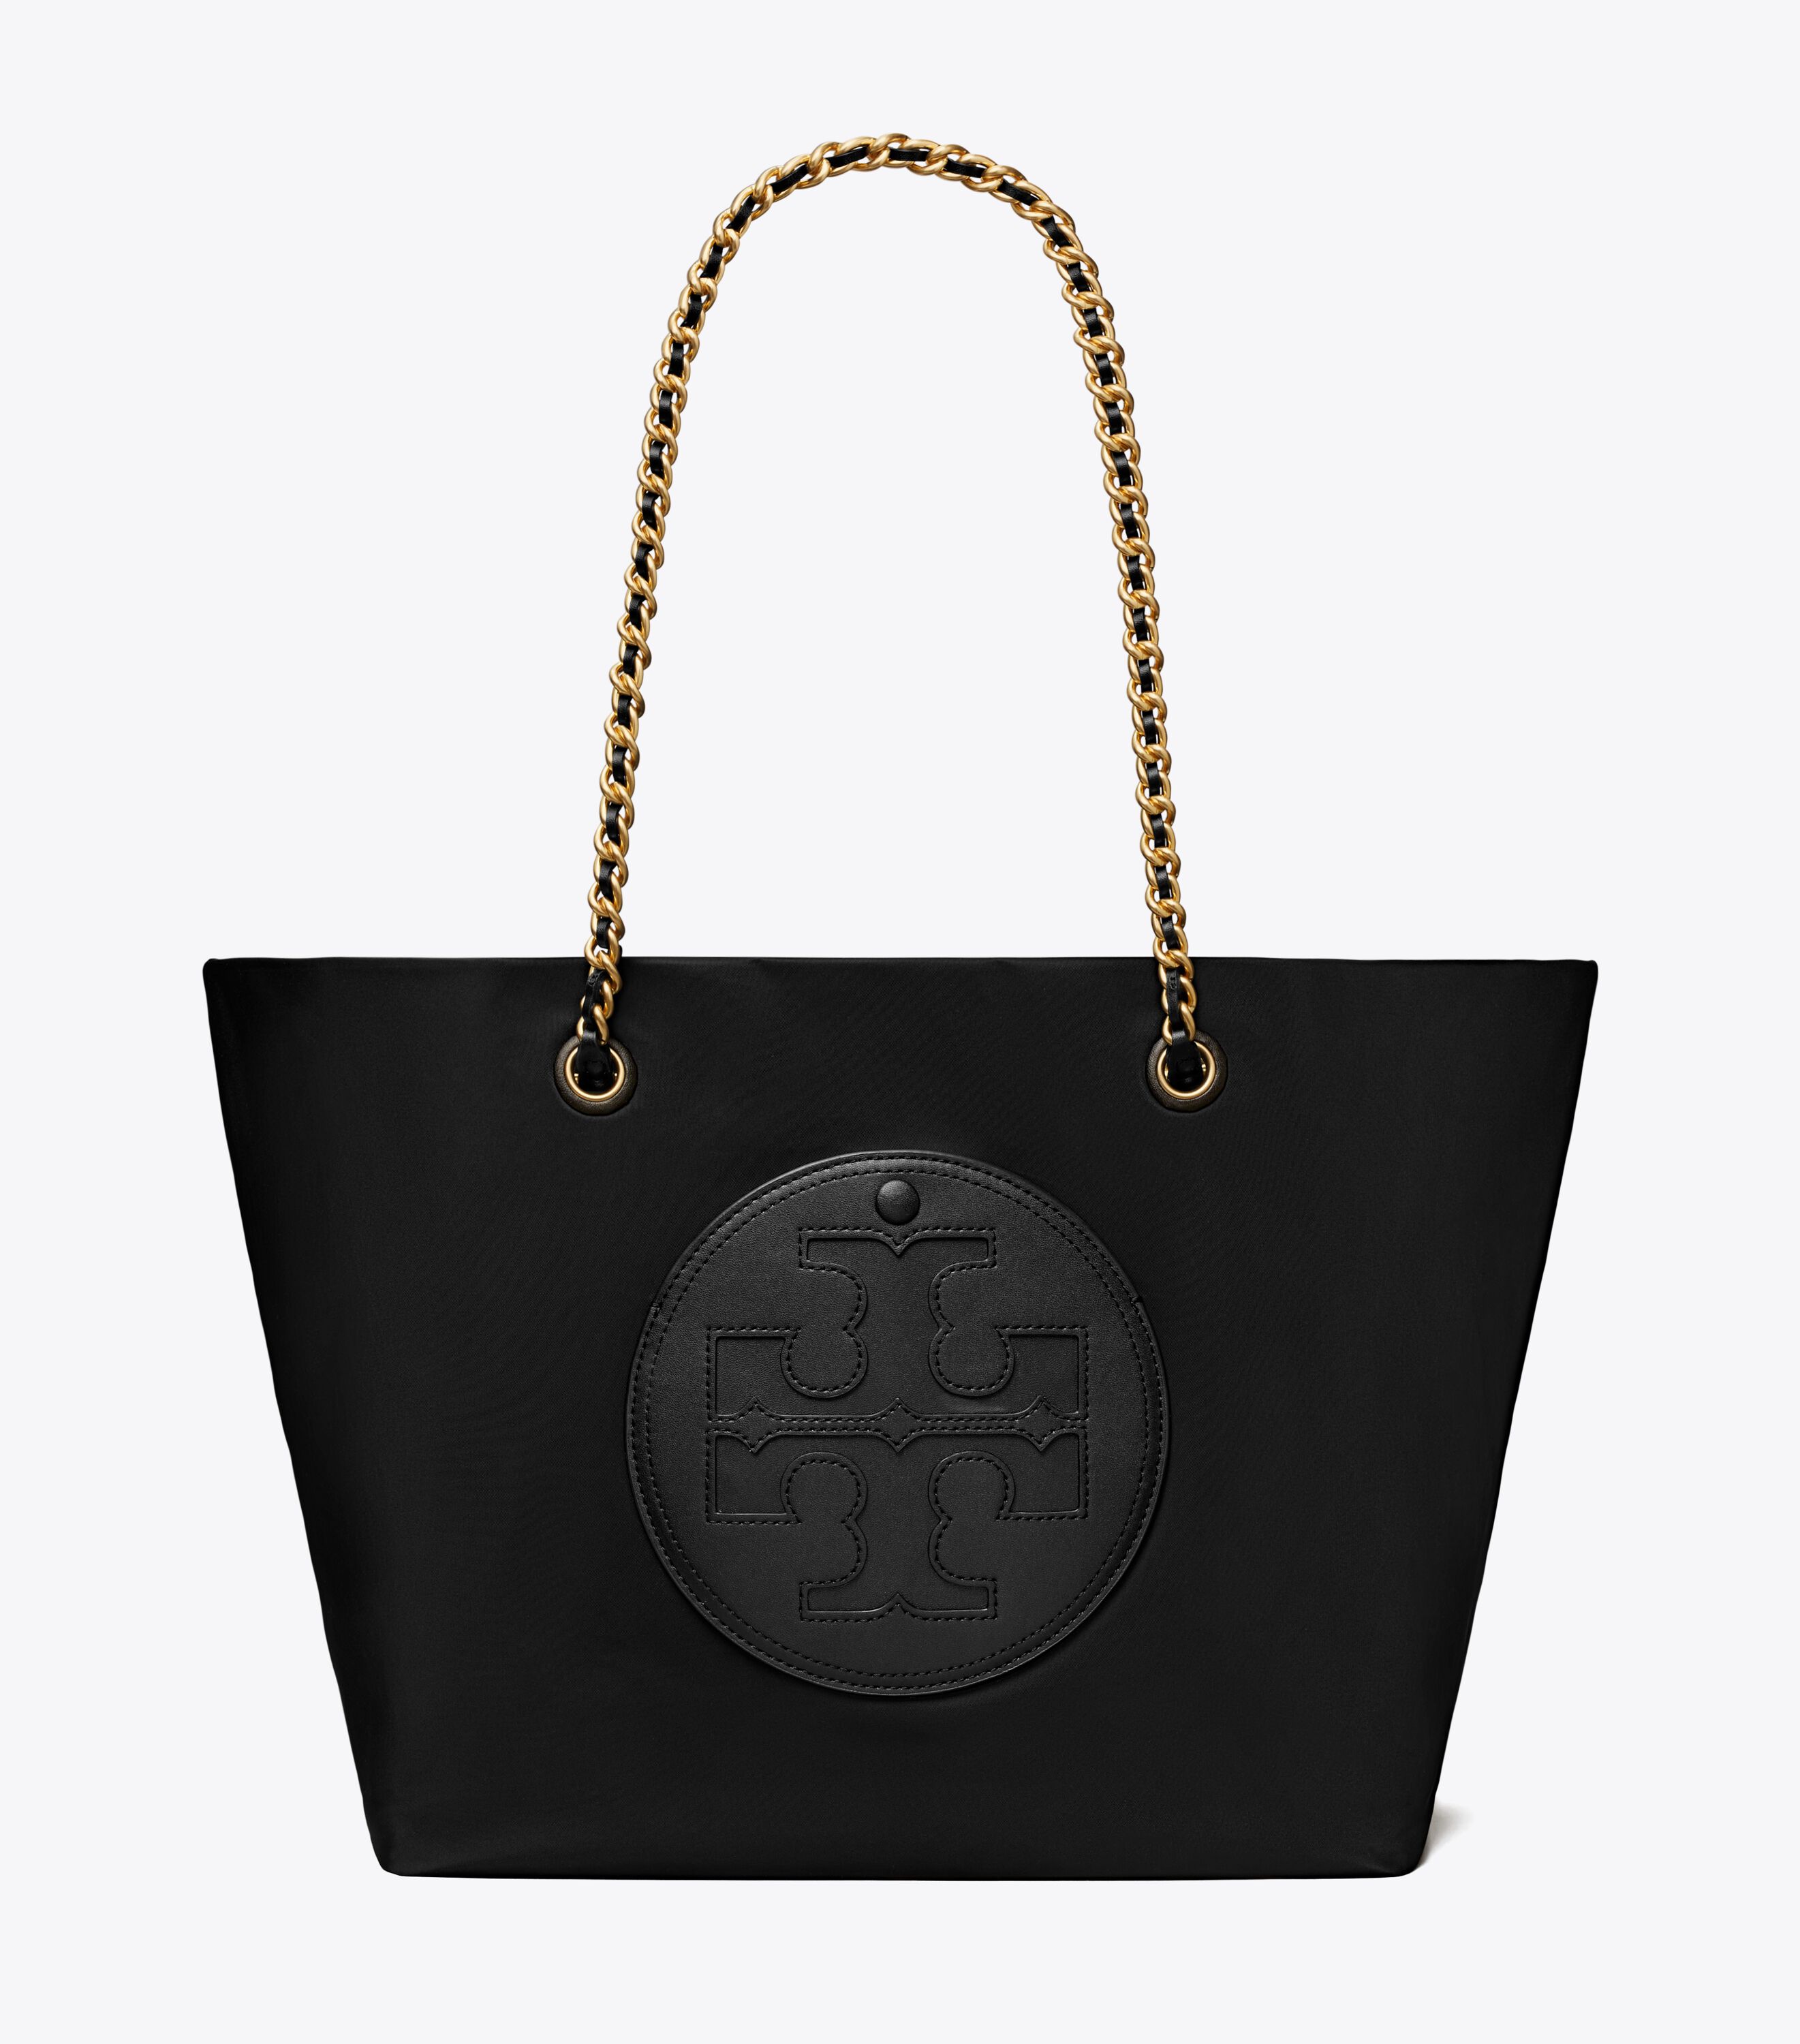 Tory Burch Pink And Green Tote Hot Sale | bellvalefarms.com